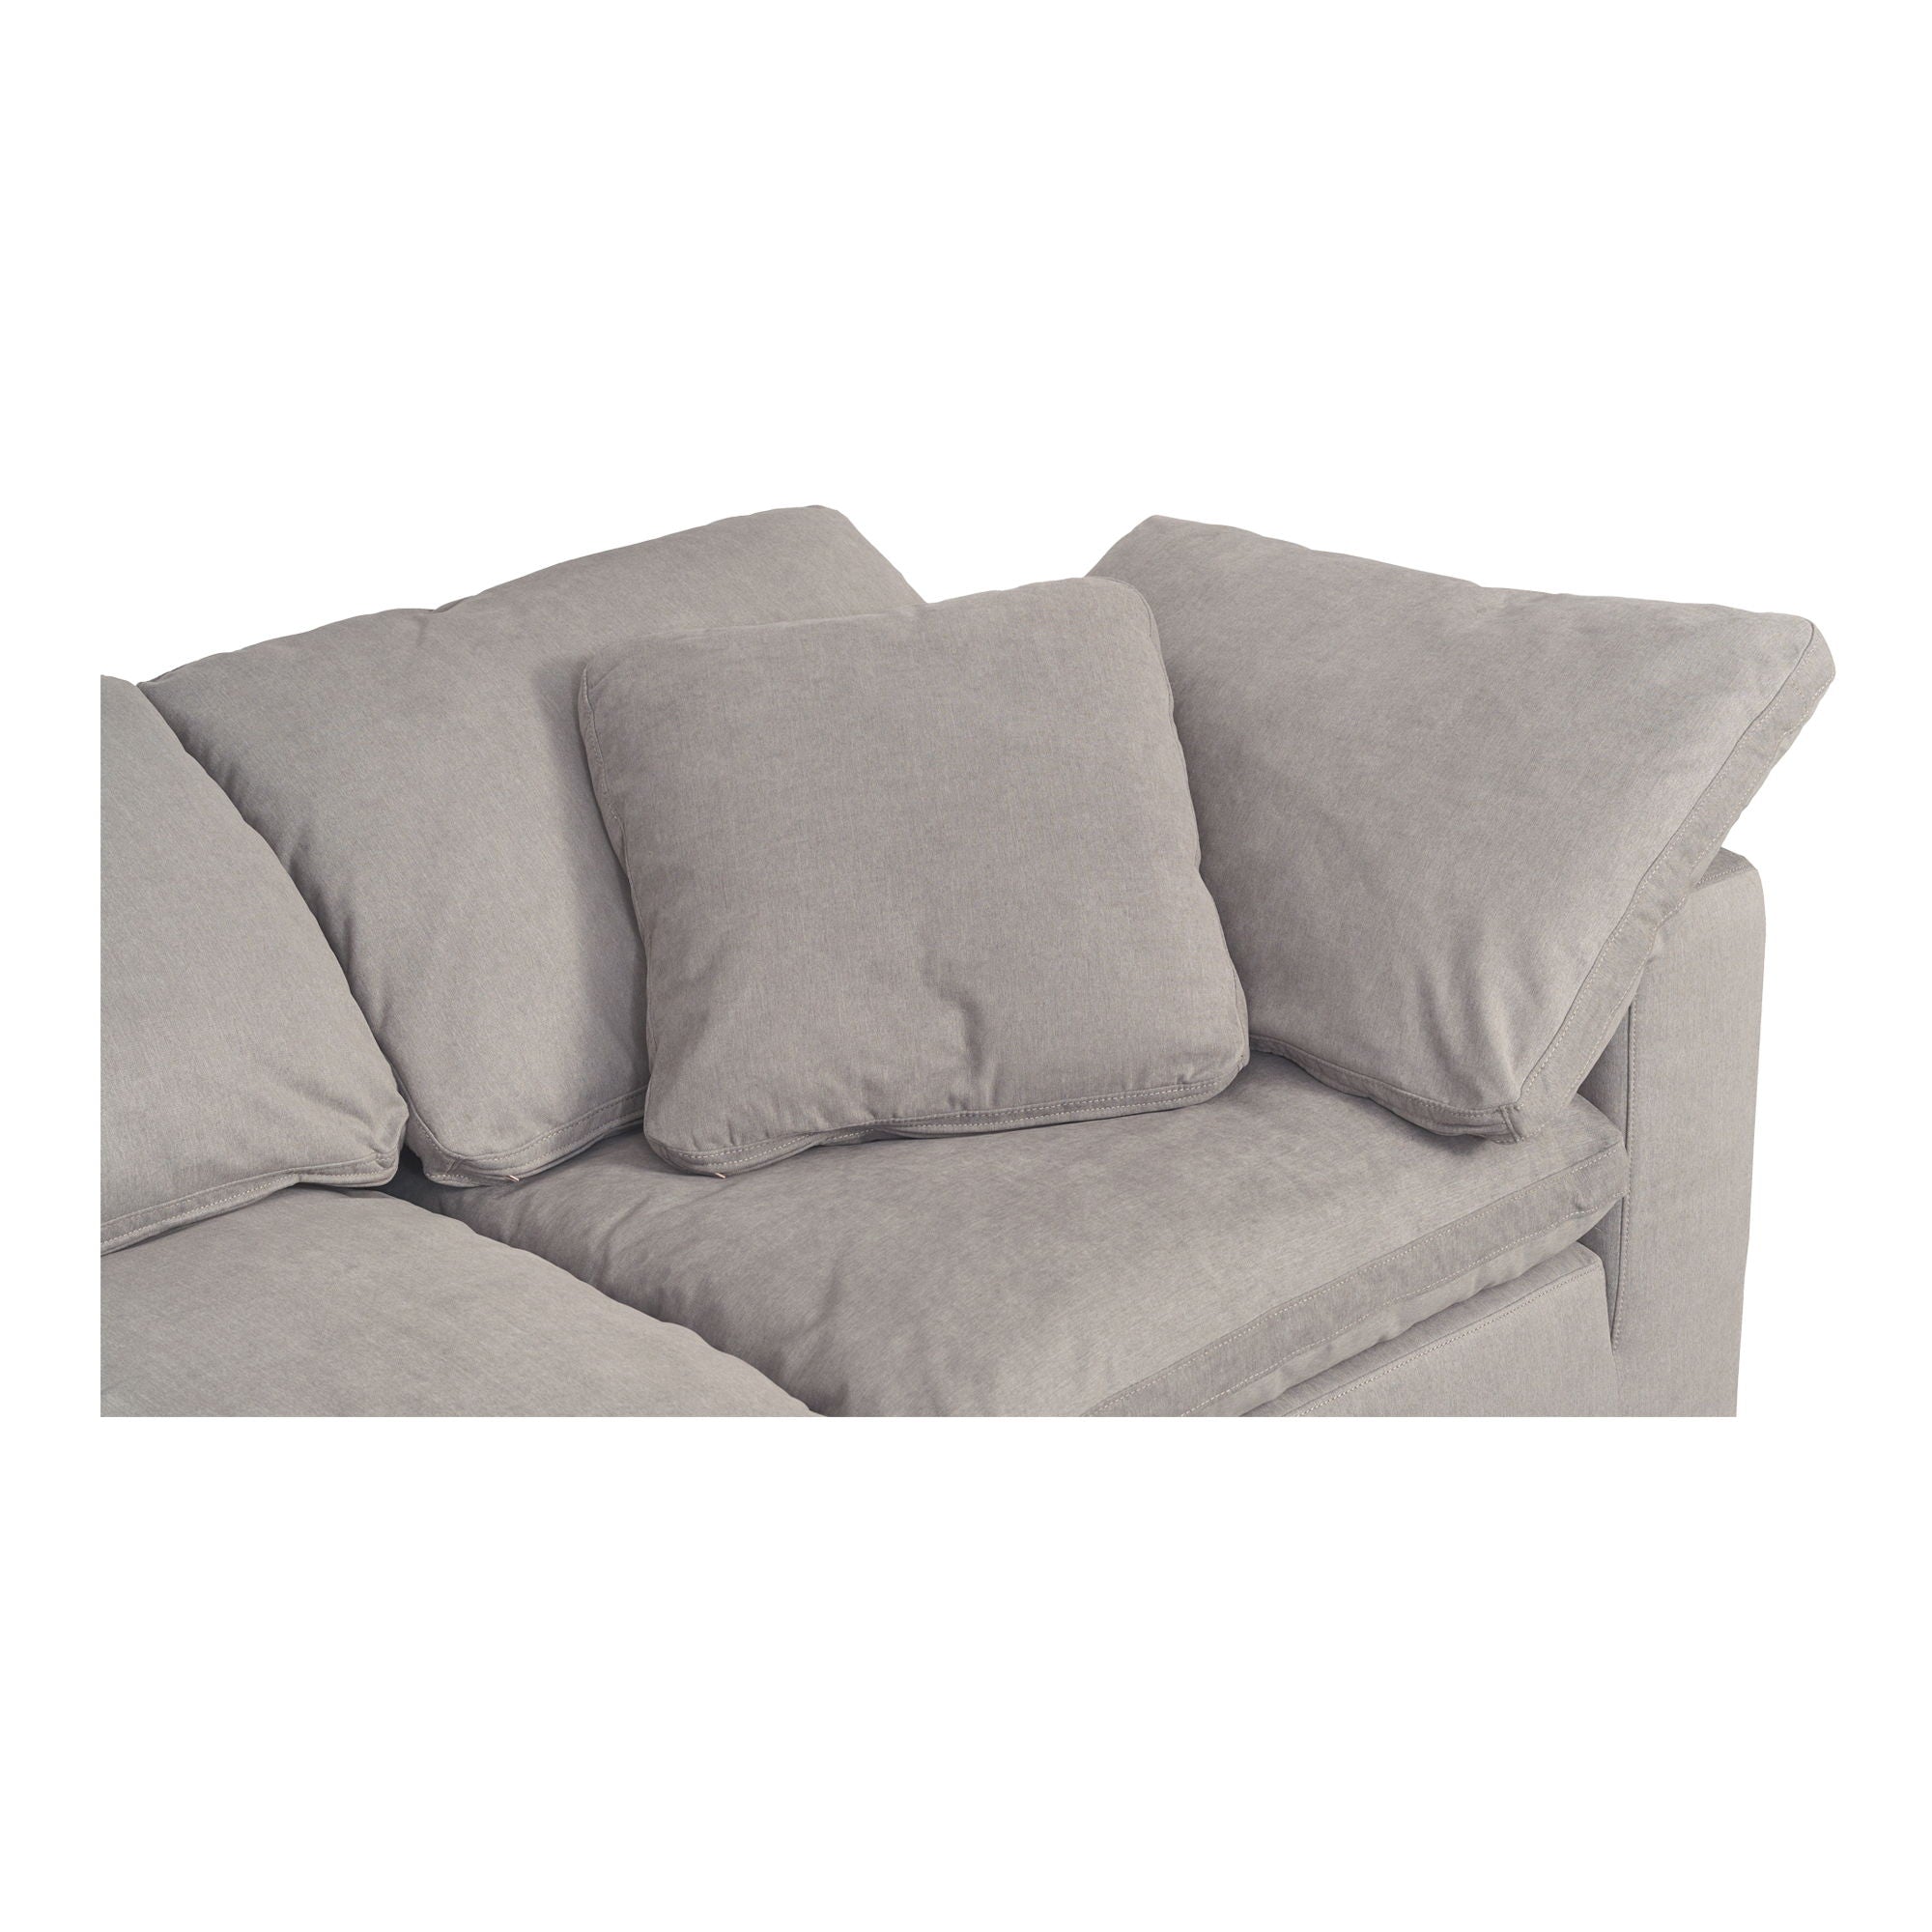 Clay - Modular Sofa Performance Fabric - Light Grey-Stationary Sectionals-American Furniture Outlet